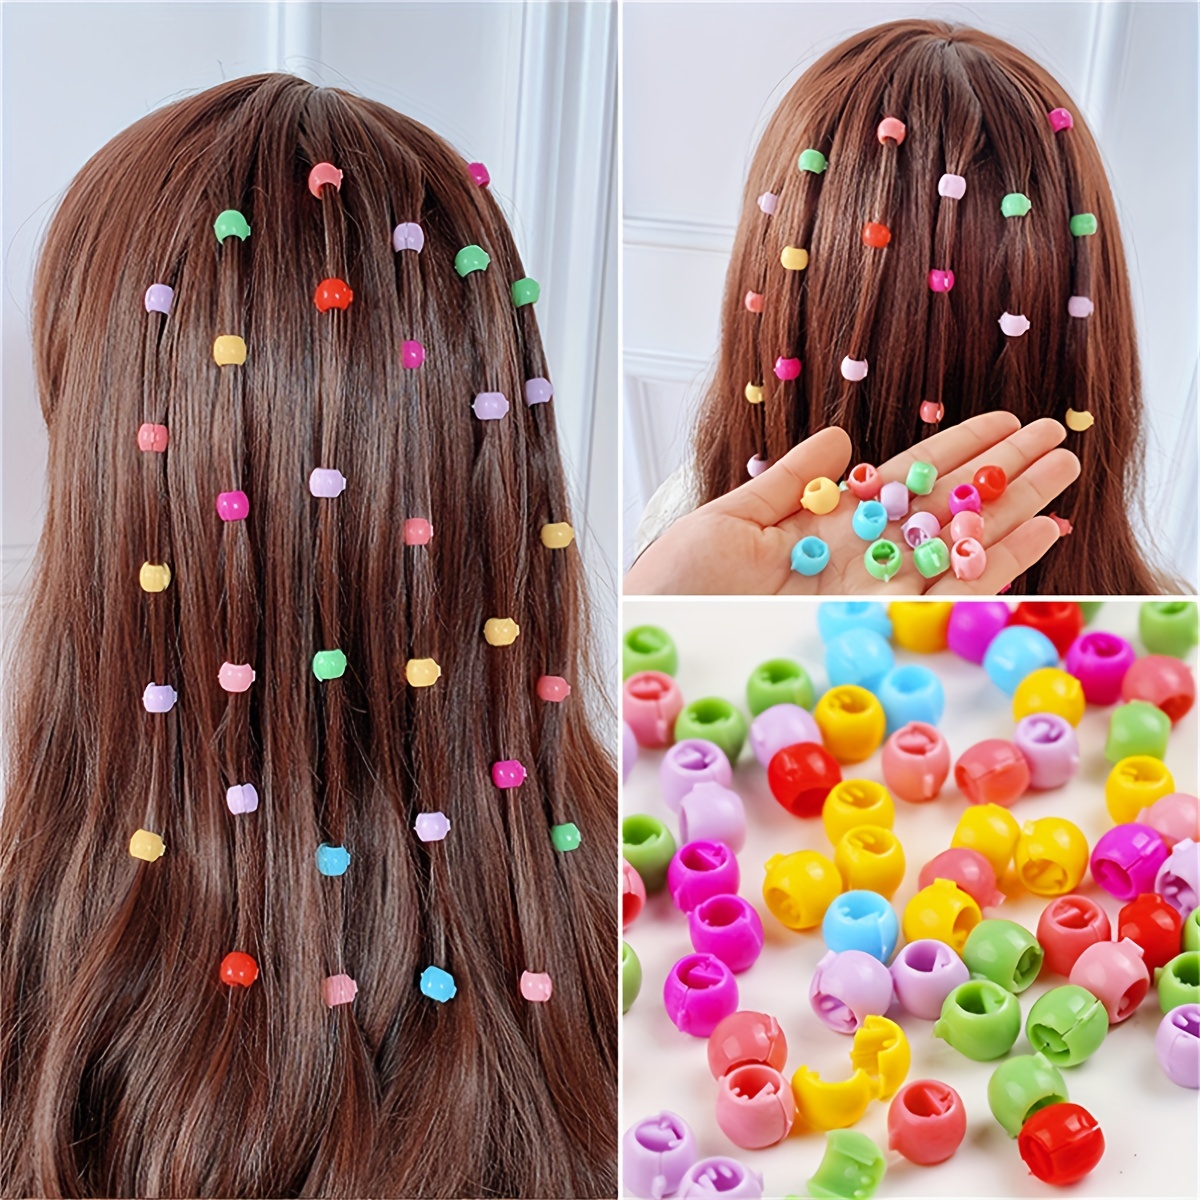 406Pcs Hair Beads Set for Women and Girls Hair Braids Including 200Pcs  10x12mm Clear White Hair Beads 200Pcs Elastic Rubber Bands 1Pcs Rat Tail  Comb